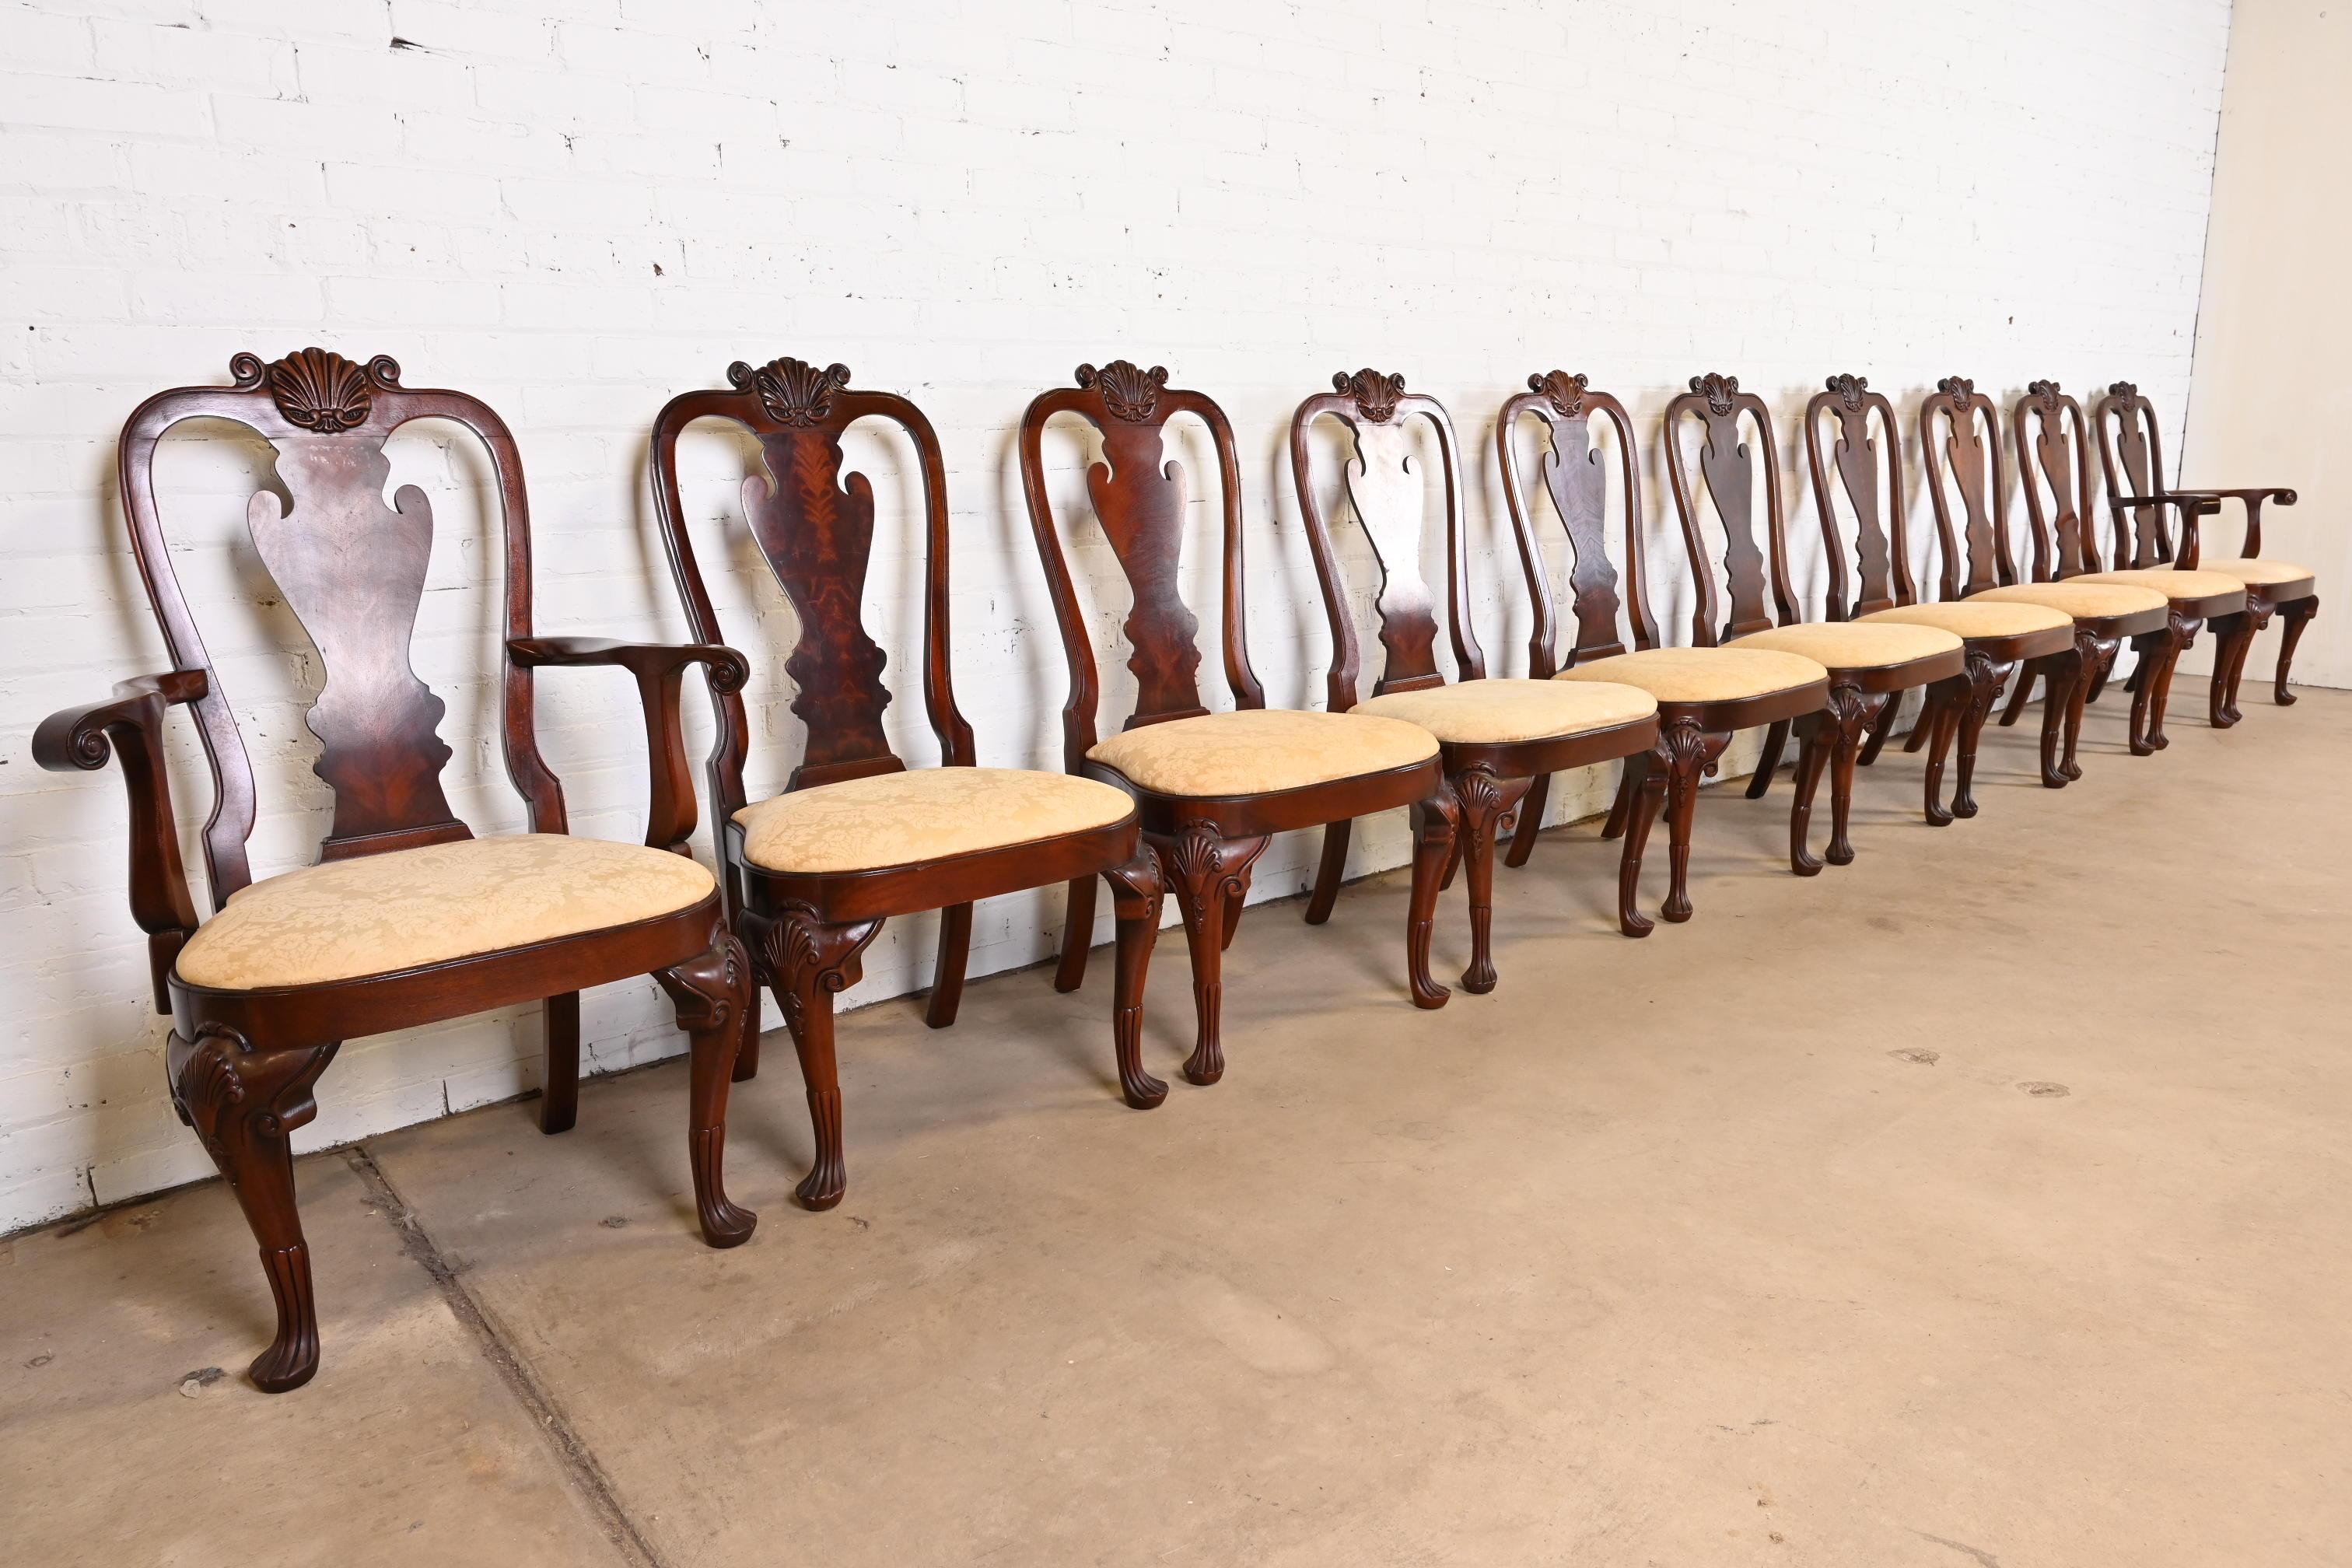 A gorgeous set of ten Georgian or Chippendale style dining chairs

By Kindel Furniture, 